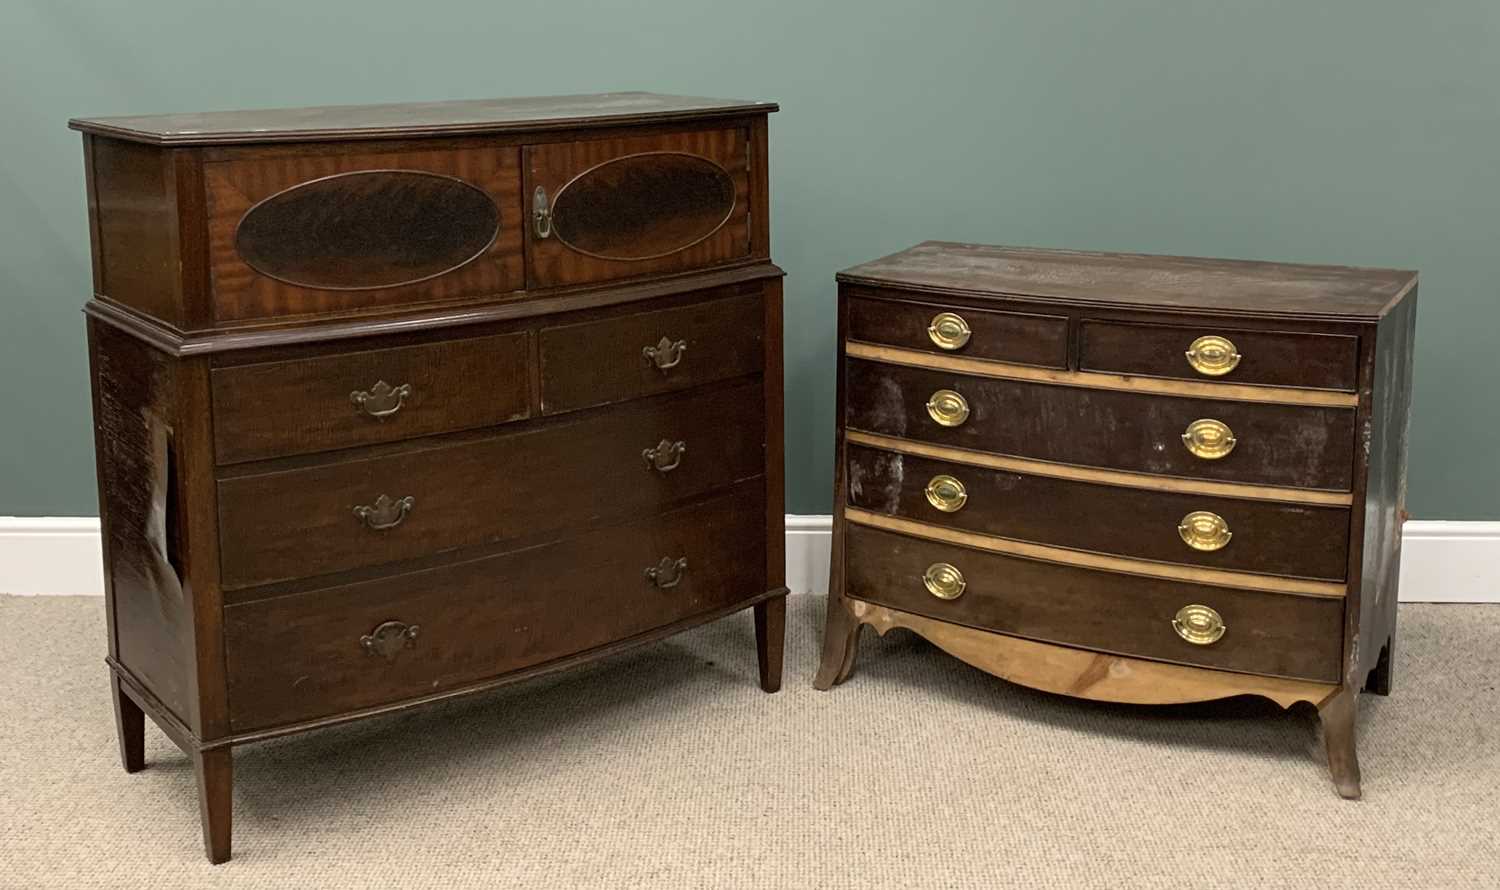 TWO ANTIQUE STYLE CHESTS comprising Regency style mahogany with bow front. 108 (h) x 108 (w) x 50cms